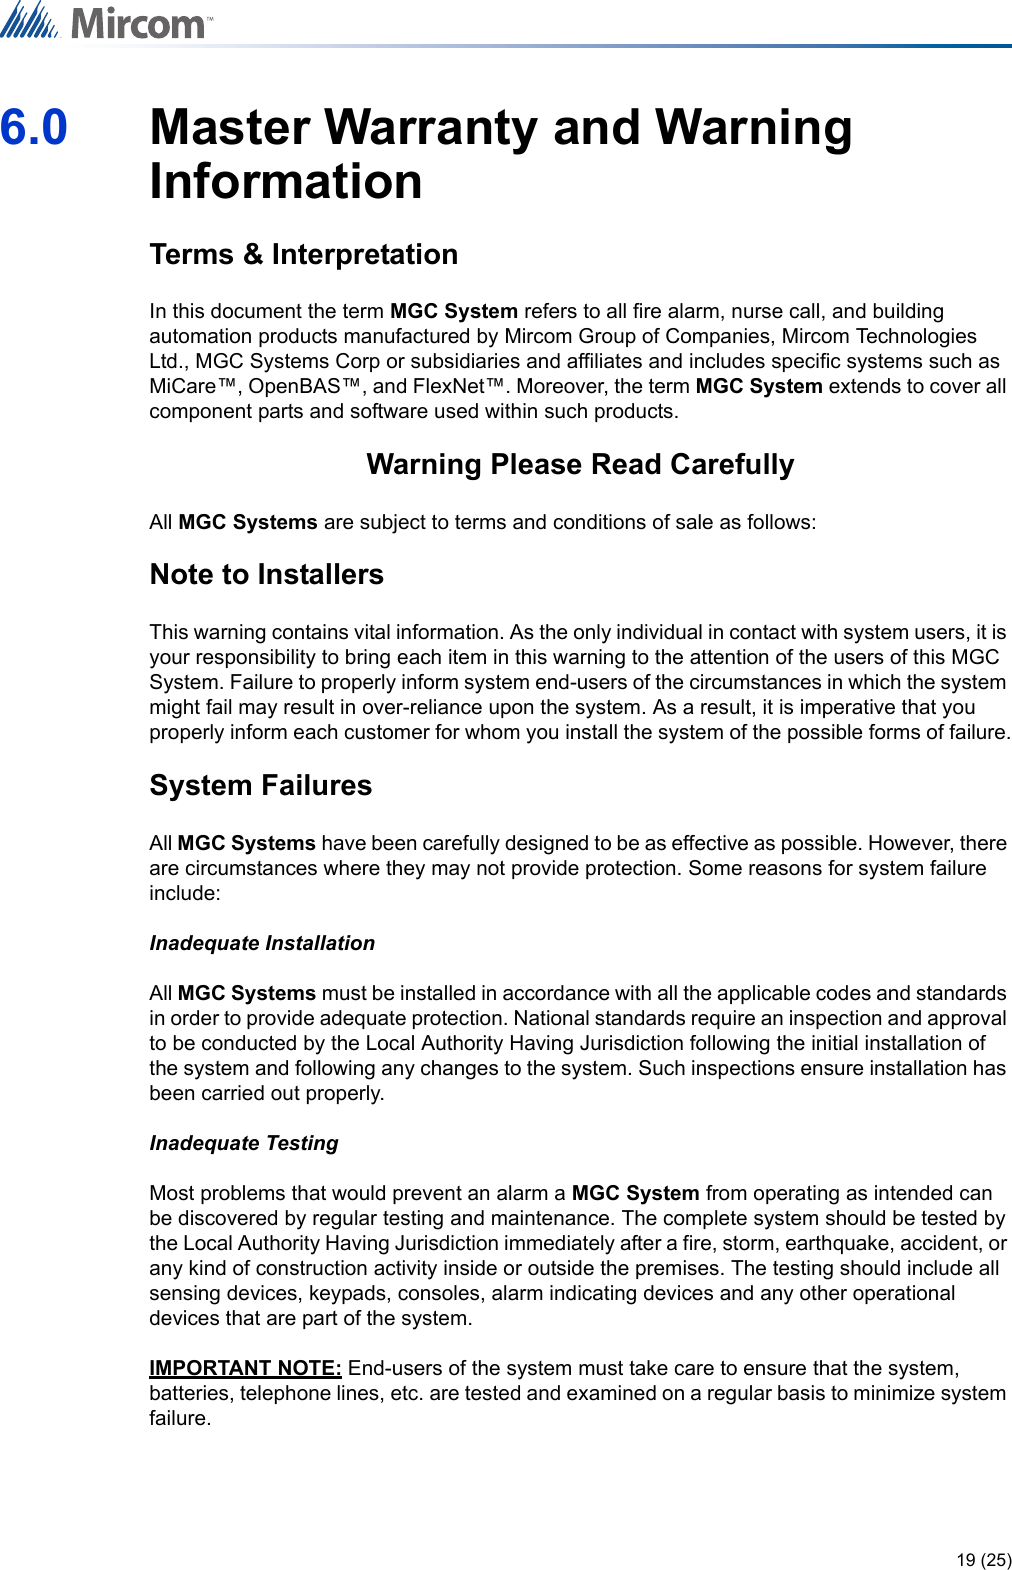 19 (25)6.0 Master Warranty and Warning InformationTerms &amp; InterpretationIn this document the term MGC System refers to all fire alarm, nurse call, and building automation products manufactured by Mircom Group of Companies, Mircom Technologies Ltd., MGC Systems Corp or subsidiaries and affiliates and includes specific systems such as MiCare™, OpenBAS™, and FlexNet™. Moreover, the term MGC System extends to cover all component parts and software used within such products.Warning Please Read CarefullyAll MGC Systems are subject to terms and conditions of sale as follows:Note to InstallersThis warning contains vital information. As the only individual in contact with system users, it is your responsibility to bring each item in this warning to the attention of the users of this MGC System. Failure to properly inform system end-users of the circumstances in which the system might fail may result in over-reliance upon the system. As a result, it is imperative that you properly inform each customer for whom you install the system of the possible forms of failure.System FailuresAll MGC Systems have been carefully designed to be as effective as possible. However, there are circumstances where they may not provide protection. Some reasons for system failure include:Inadequate InstallationAll MGC Systems must be installed in accordance with all the applicable codes and standards in order to provide adequate protection. National standards require an inspection and approval to be conducted by the Local Authority Having Jurisdiction following the initial installation of the system and following any changes to the system. Such inspections ensure installation has been carried out properly.Inadequate TestingMost problems that would prevent an alarm a MGC System from operating as intended can be discovered by regular testing and maintenance. The complete system should be tested by the Local Authority Having Jurisdiction immediately after a fire, storm, earthquake, accident, or any kind of construction activity inside or outside the premises. The testing should include all sensing devices, keypads, consoles, alarm indicating devices and any other operational devices that are part of the system.IMPORTANT NOTE: End-users of the system must take care to ensure that the system, batteries, telephone lines, etc. are tested and examined on a regular basis to minimize system failure.